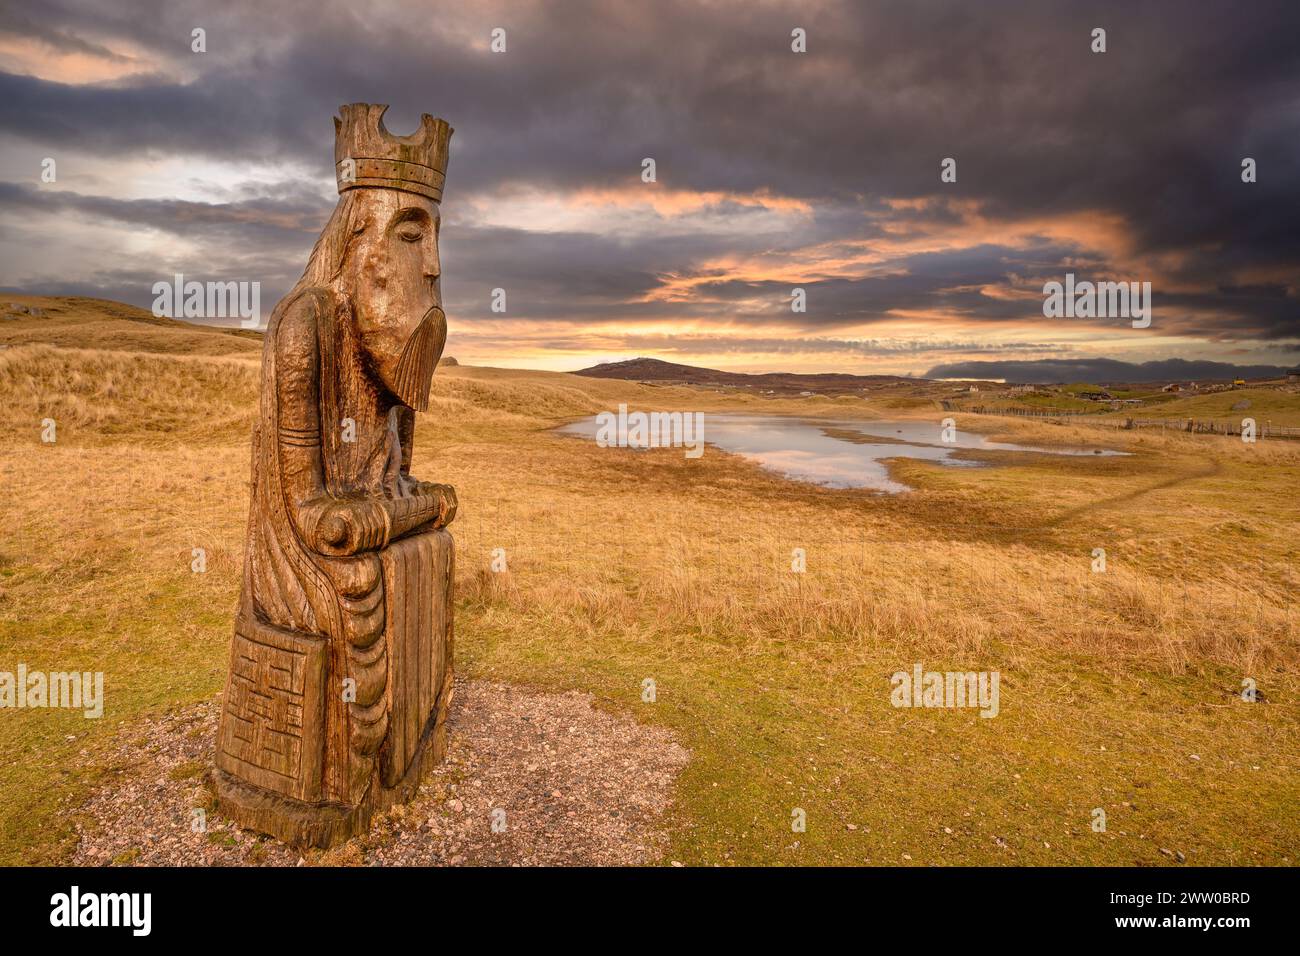 Giant Chessman statue, standing on the Uig Dunes near the site where the Lewis Chessmen were discovered, Isle of Lewis, Outer Hebrides, Scotland, UK Stock Photo